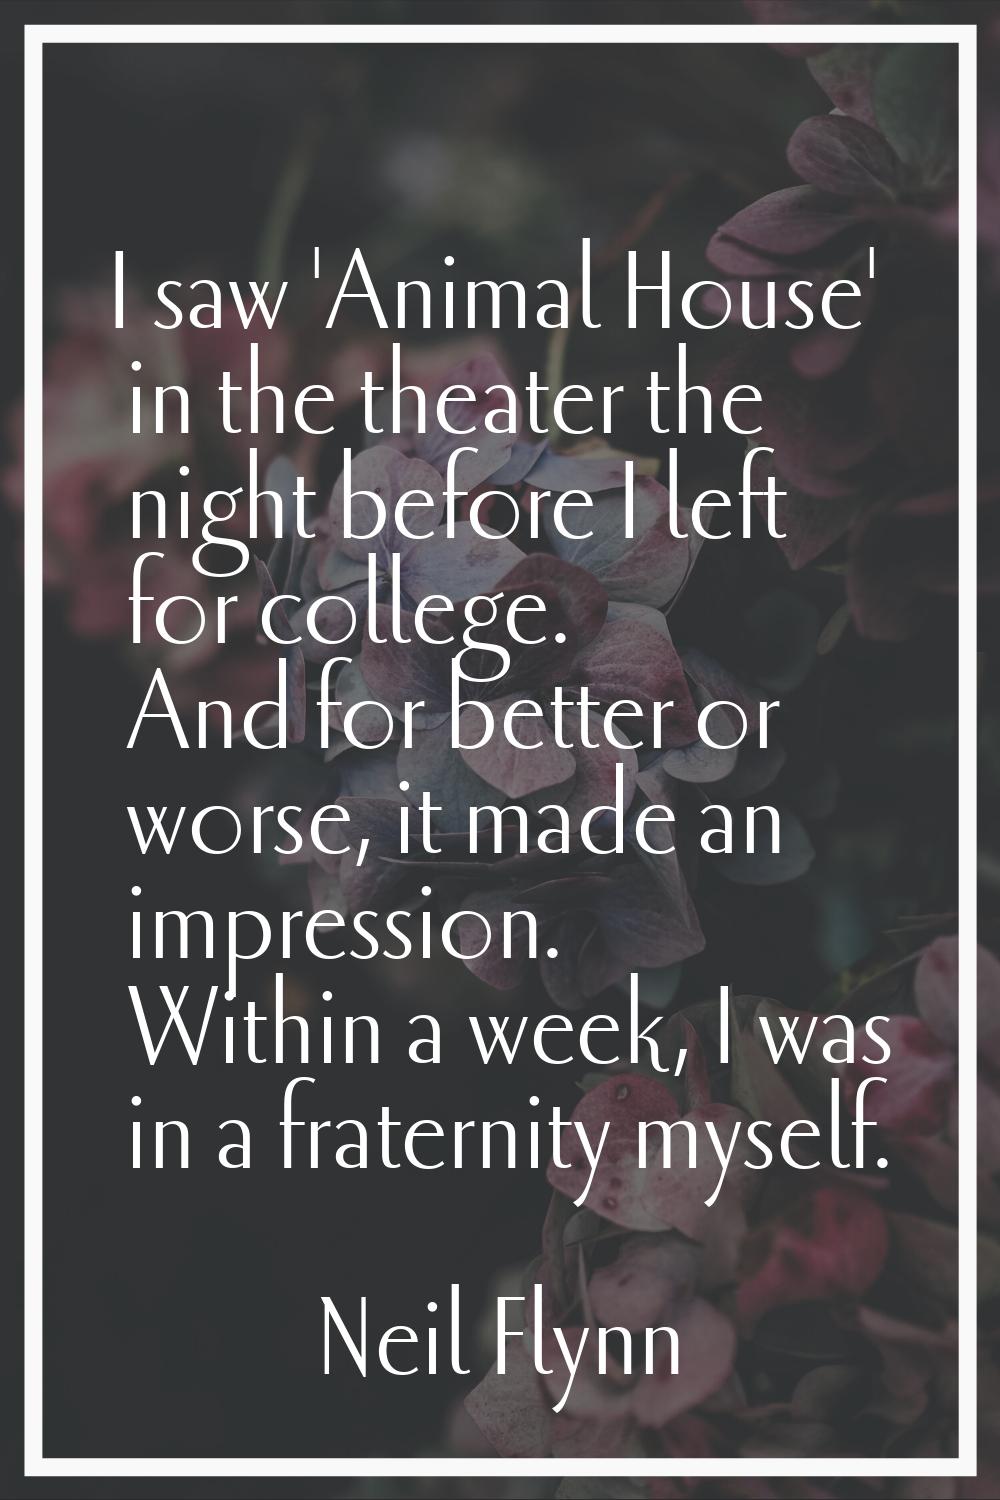 I saw 'Animal House' in the theater the night before I left for college. And for better or worse, i